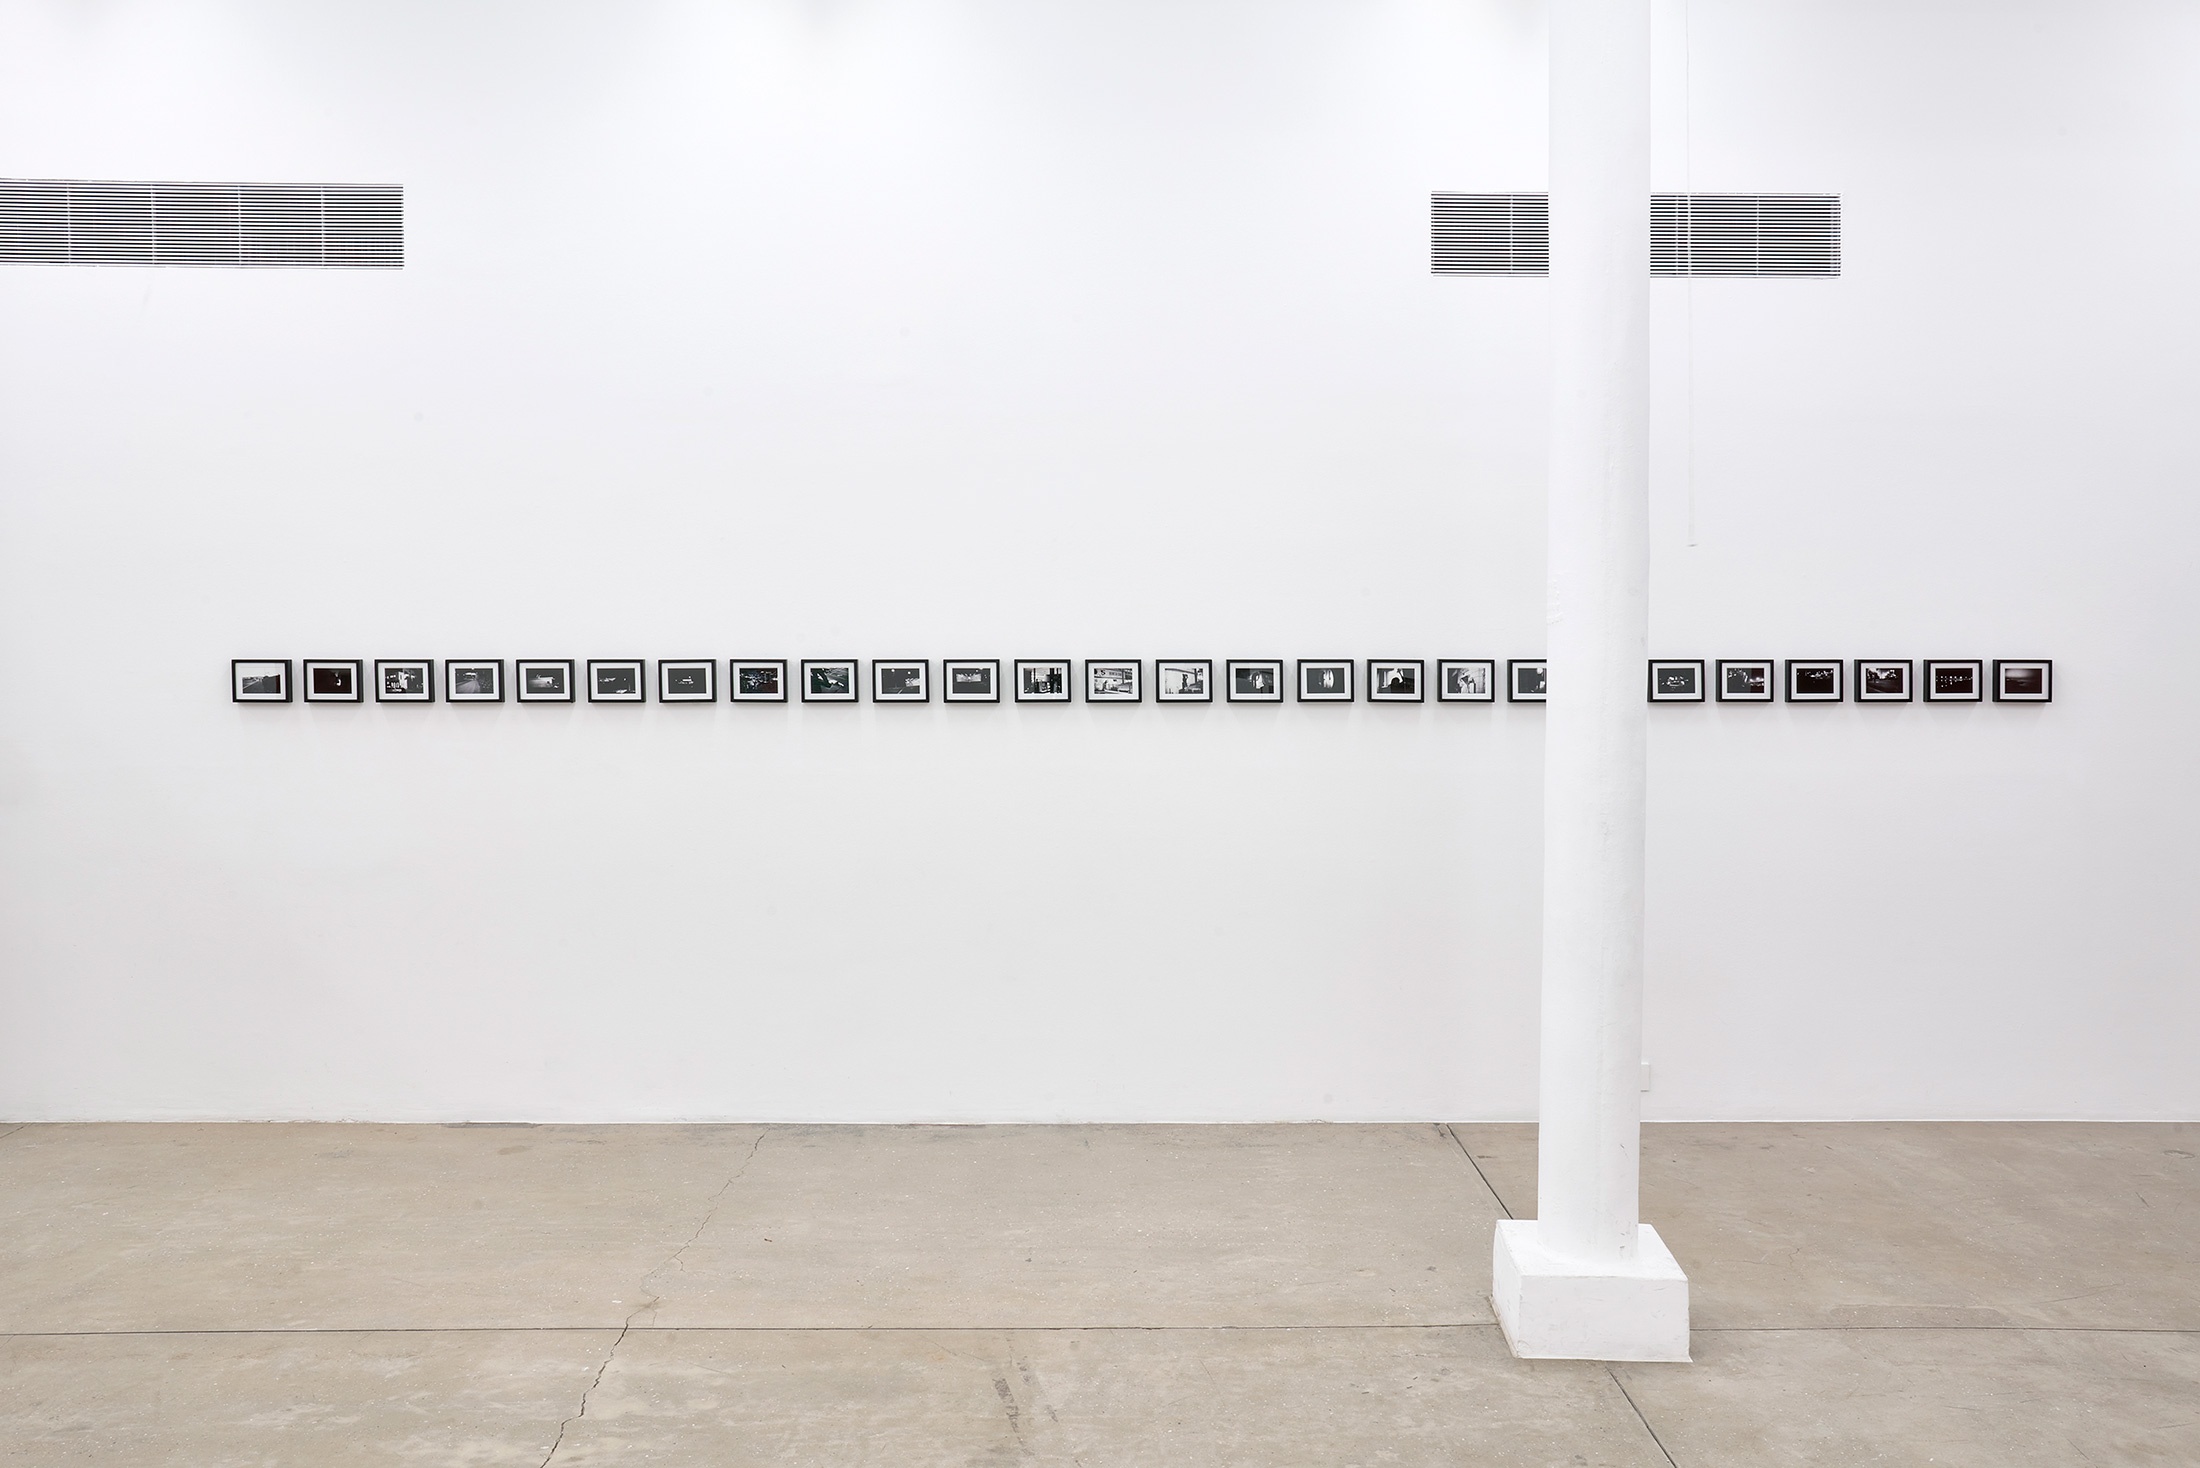 Installation photograph that shows Bas Jan Ader's photographic series 'Study for In Search of the Miraculous (One Night in Los Angeles)' with 26 framed photographs mounted on a white wall in a straight line.
